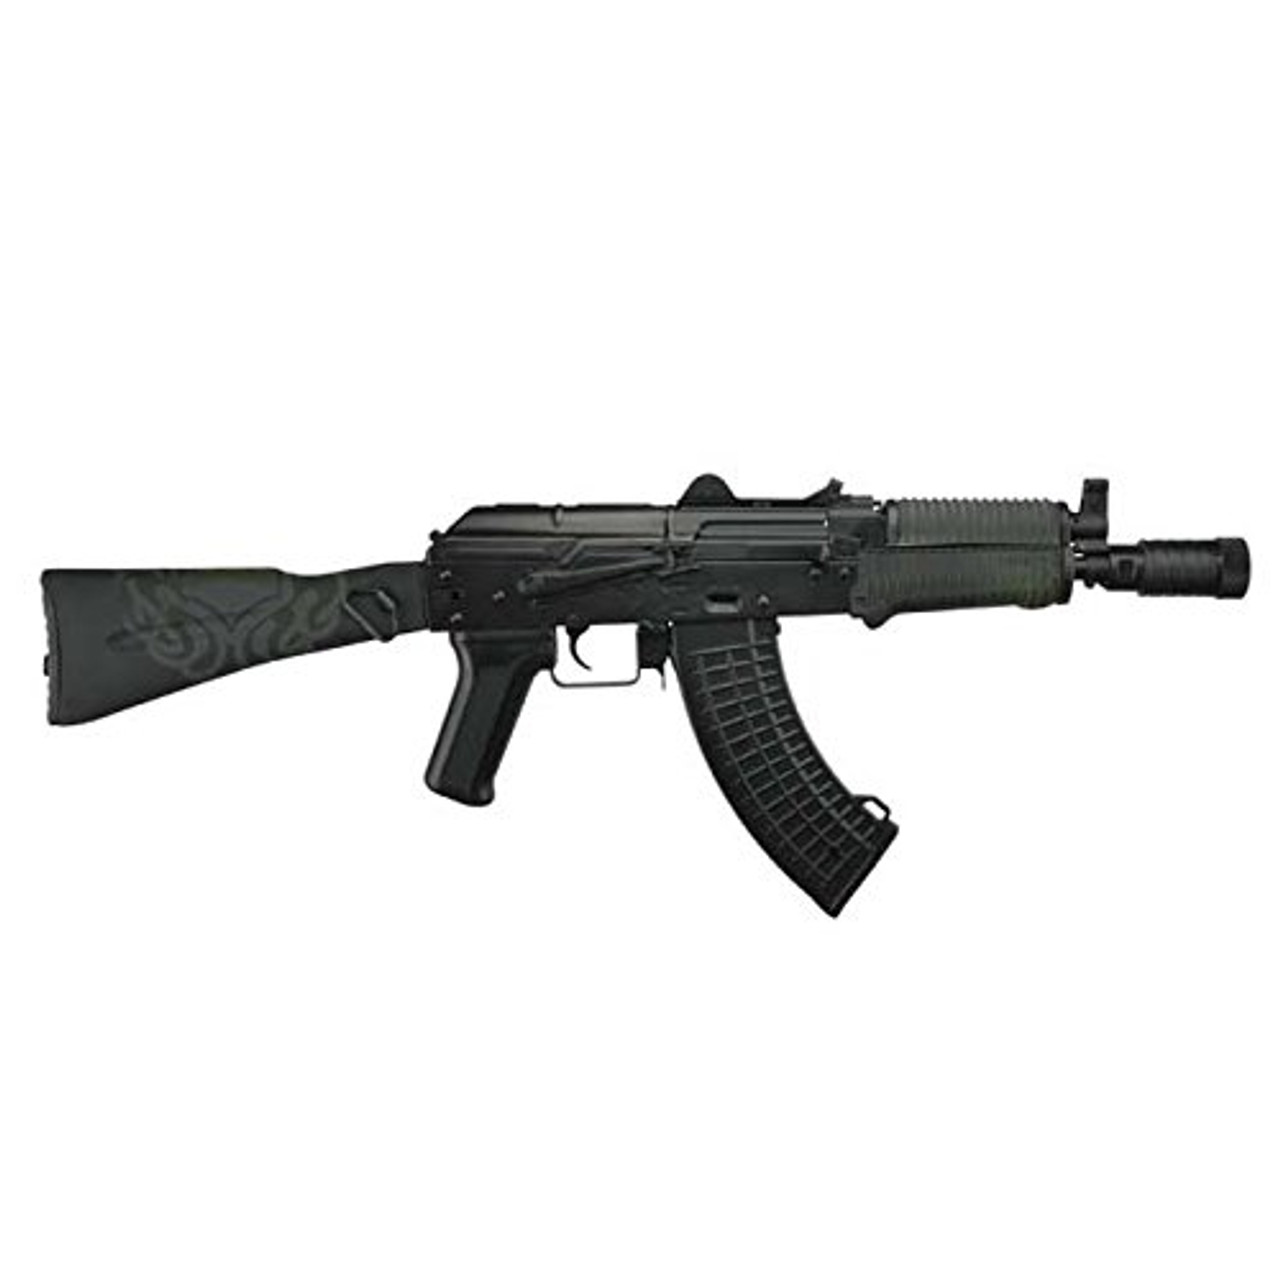 Muzzle right of LCT Airsoft AK-106 NO.31 Airsoft Electric rifle gun 